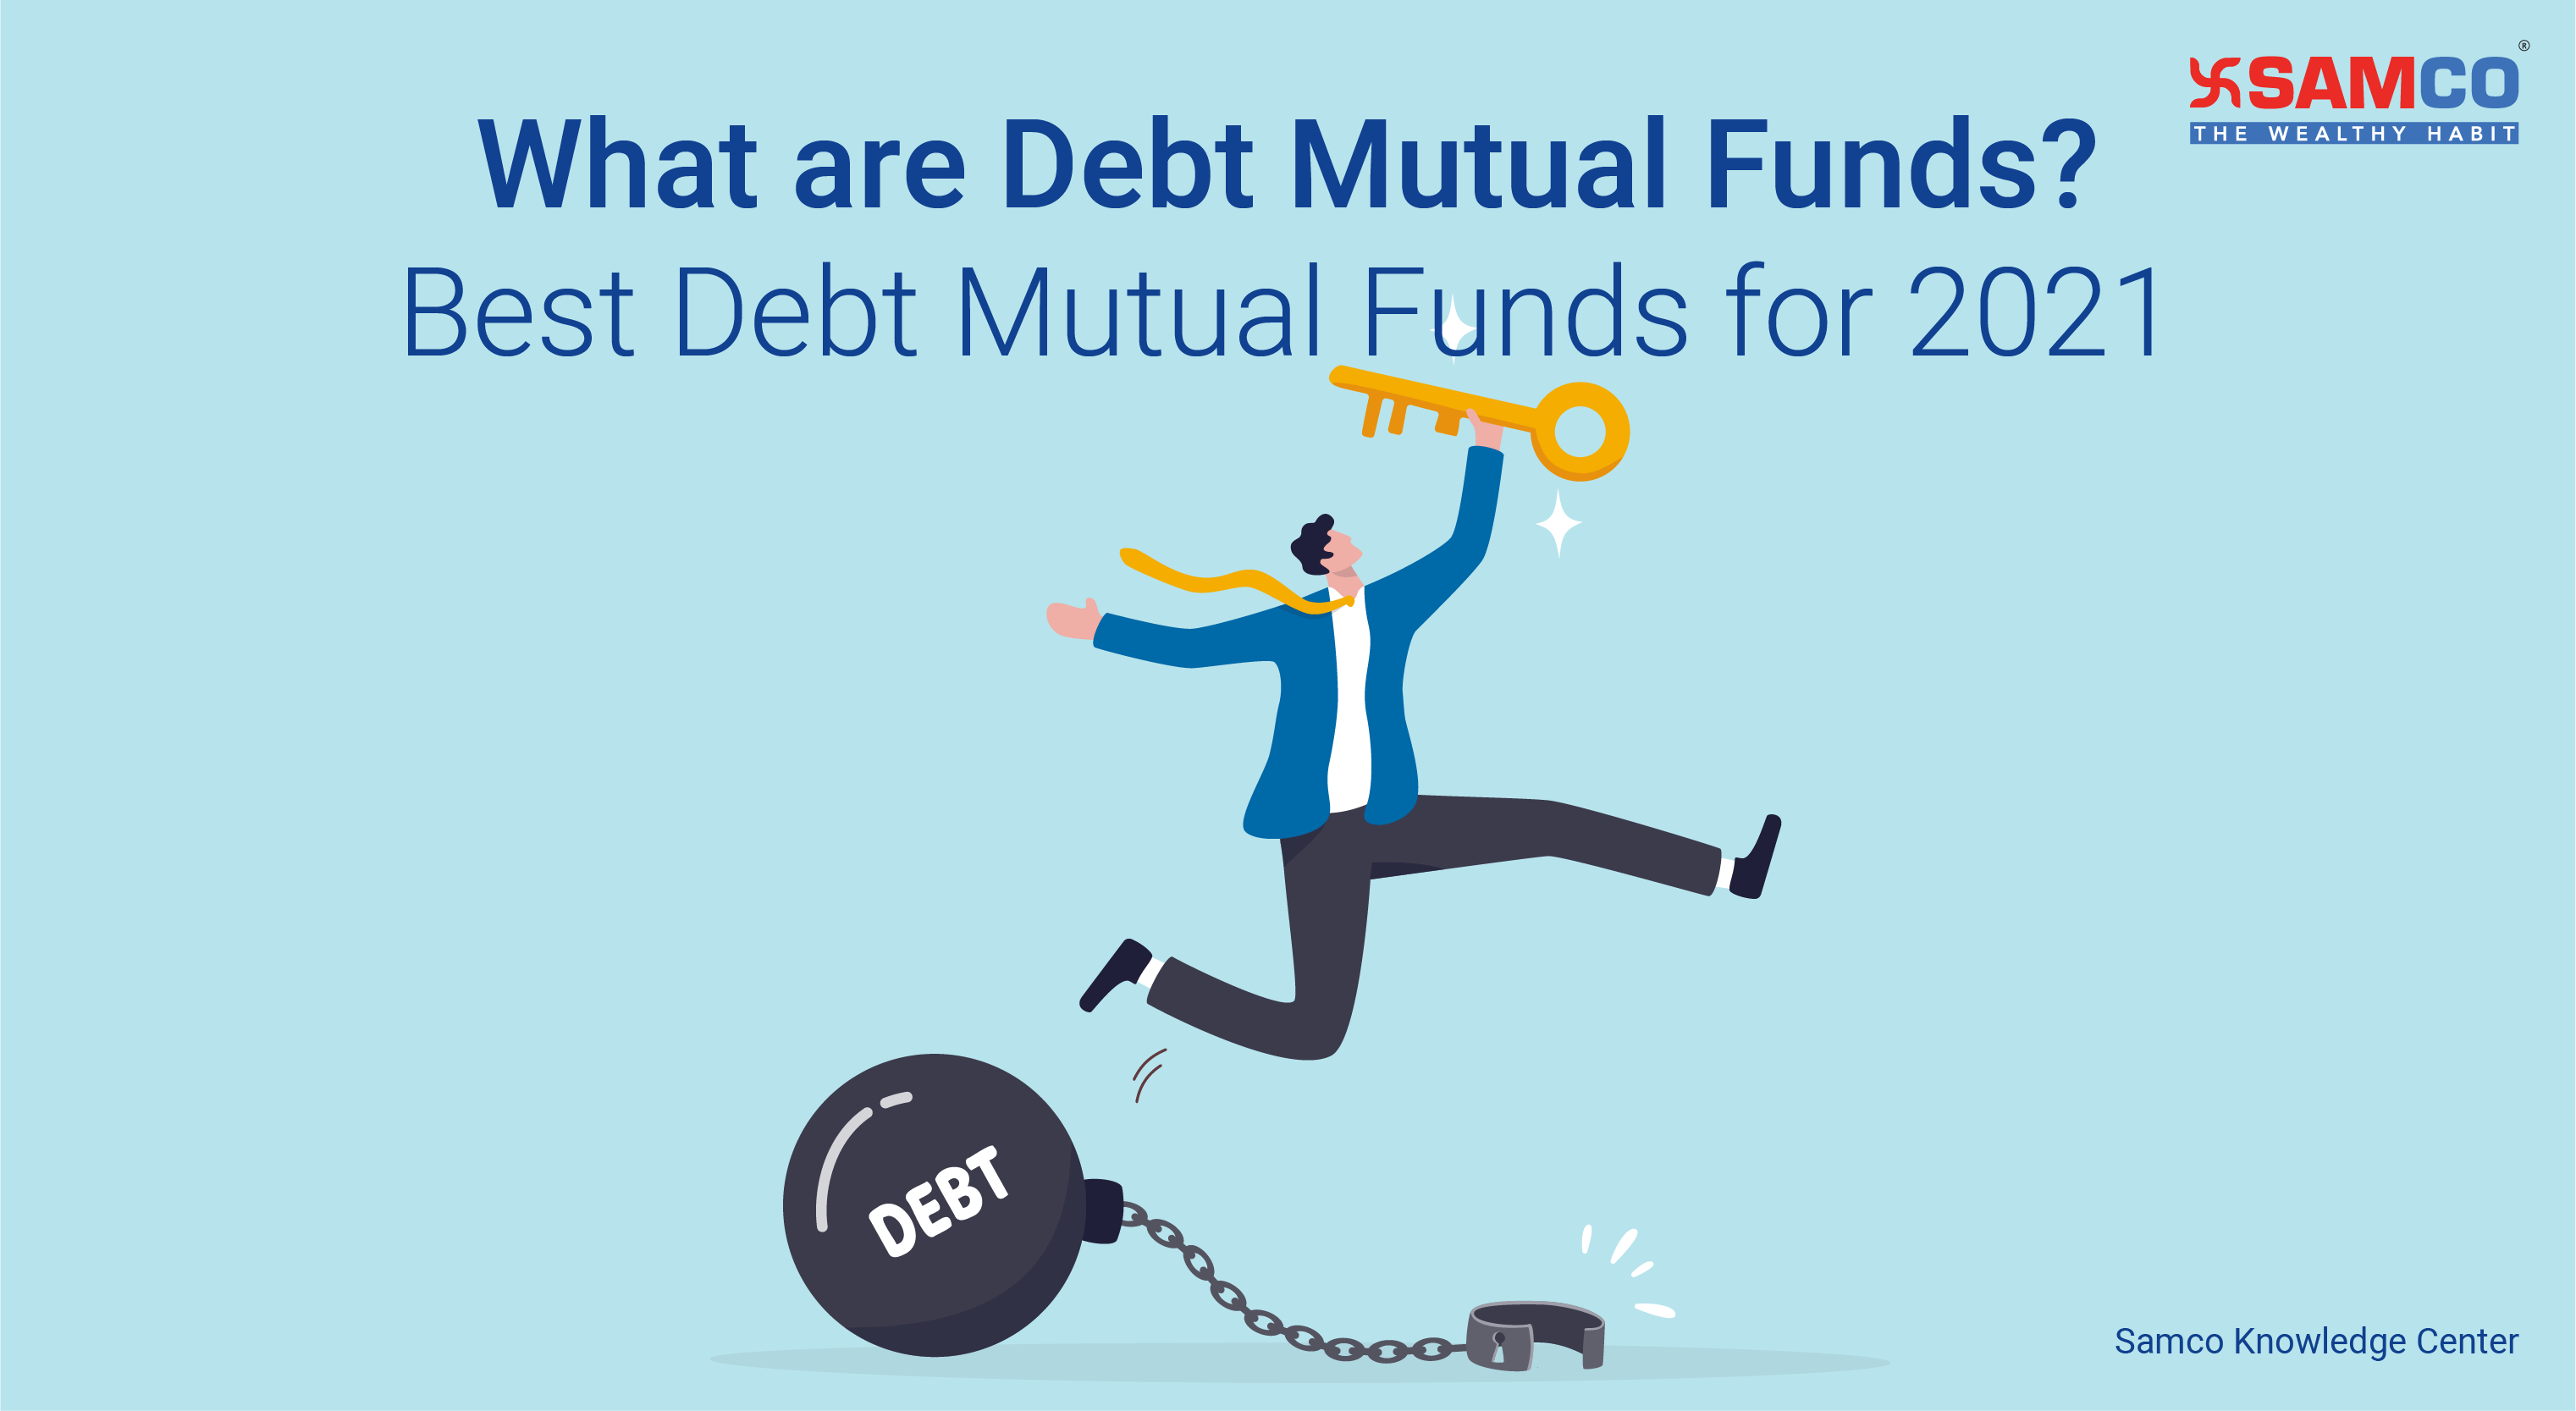 What are Debt Mutual Funds? 